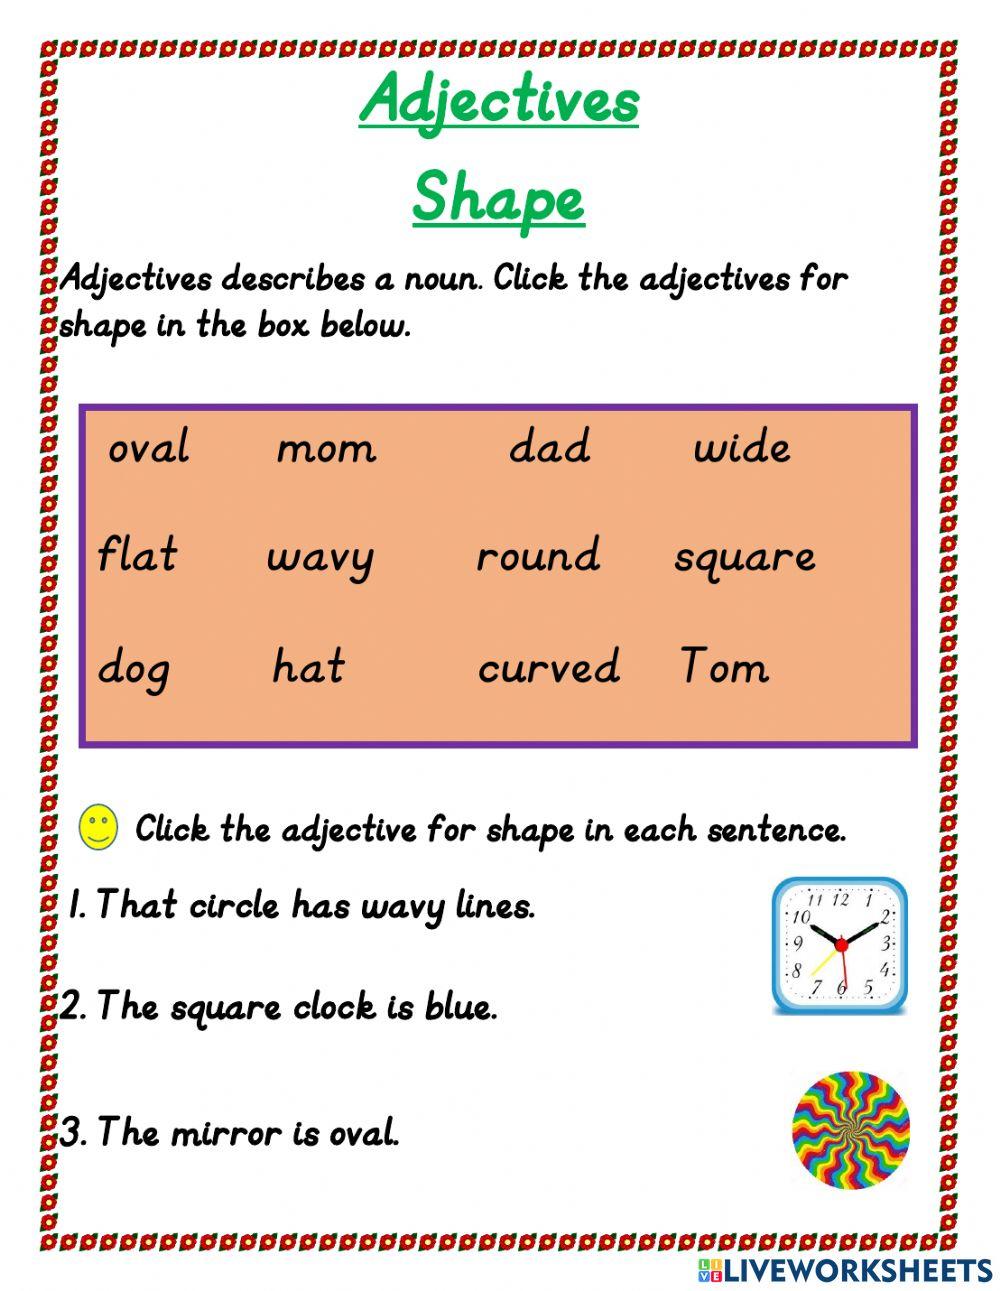 Adjectives for Shape